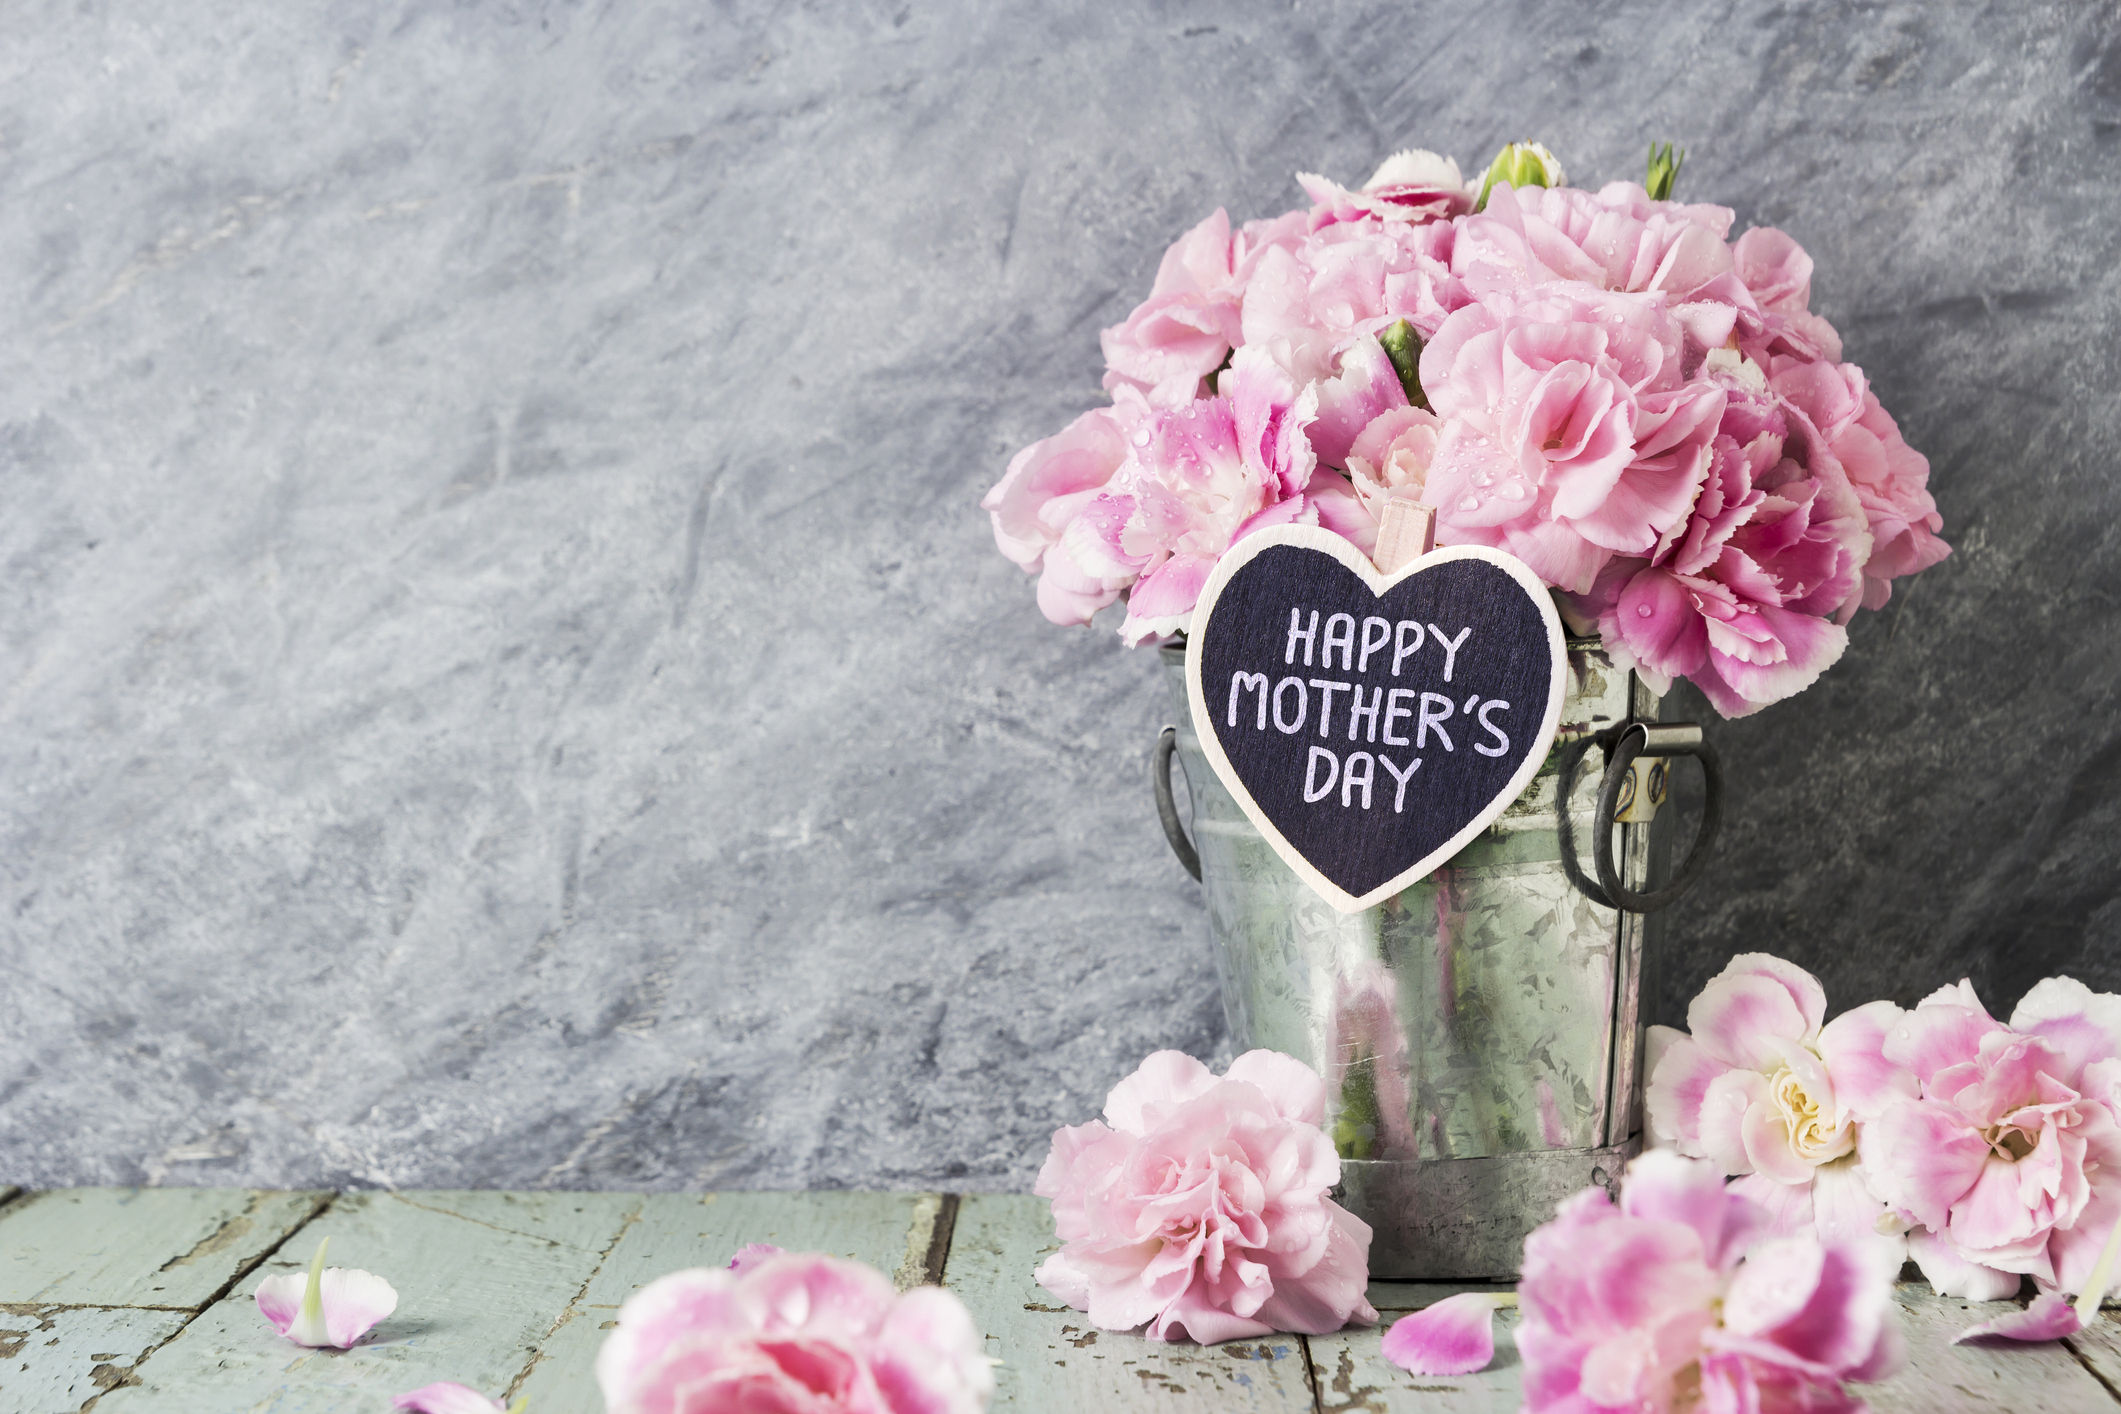 Giveaway: Win luxurious prizes for mum this Mother’s Day 2018